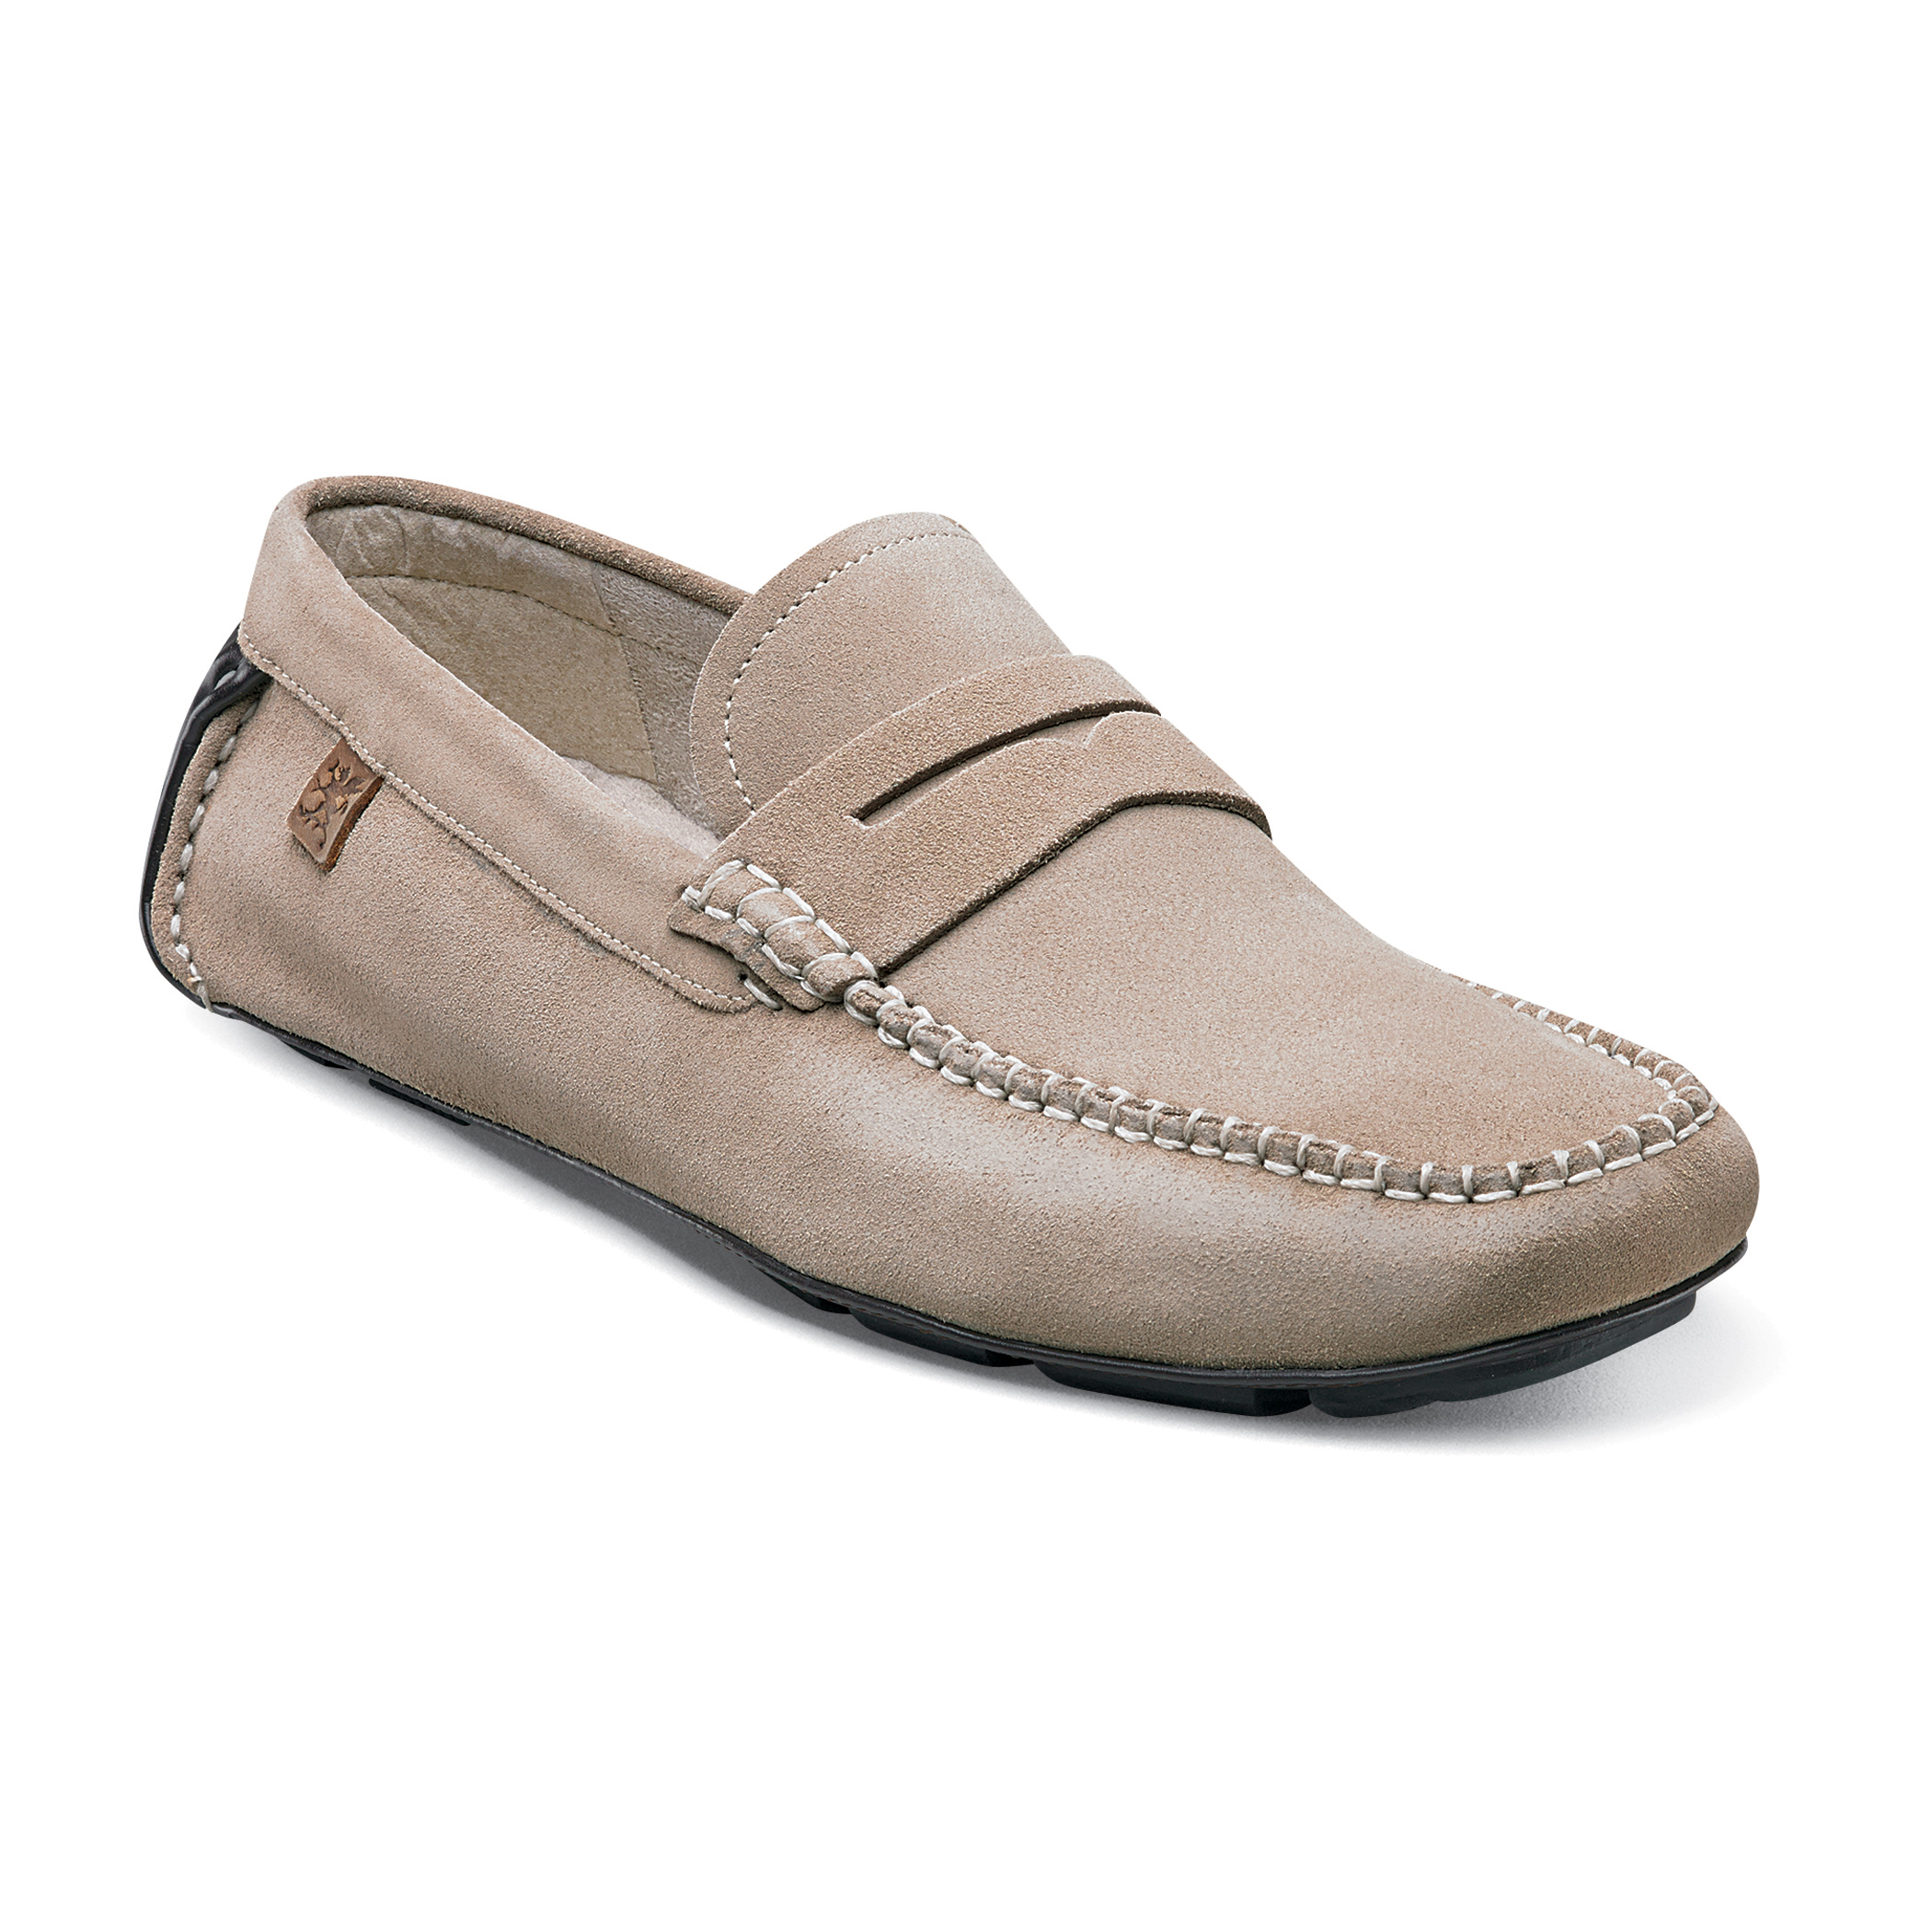 Stacy Adams Ruther Sand Suede Moc Toe Loafer Shoes 24894 - $79.90 ...